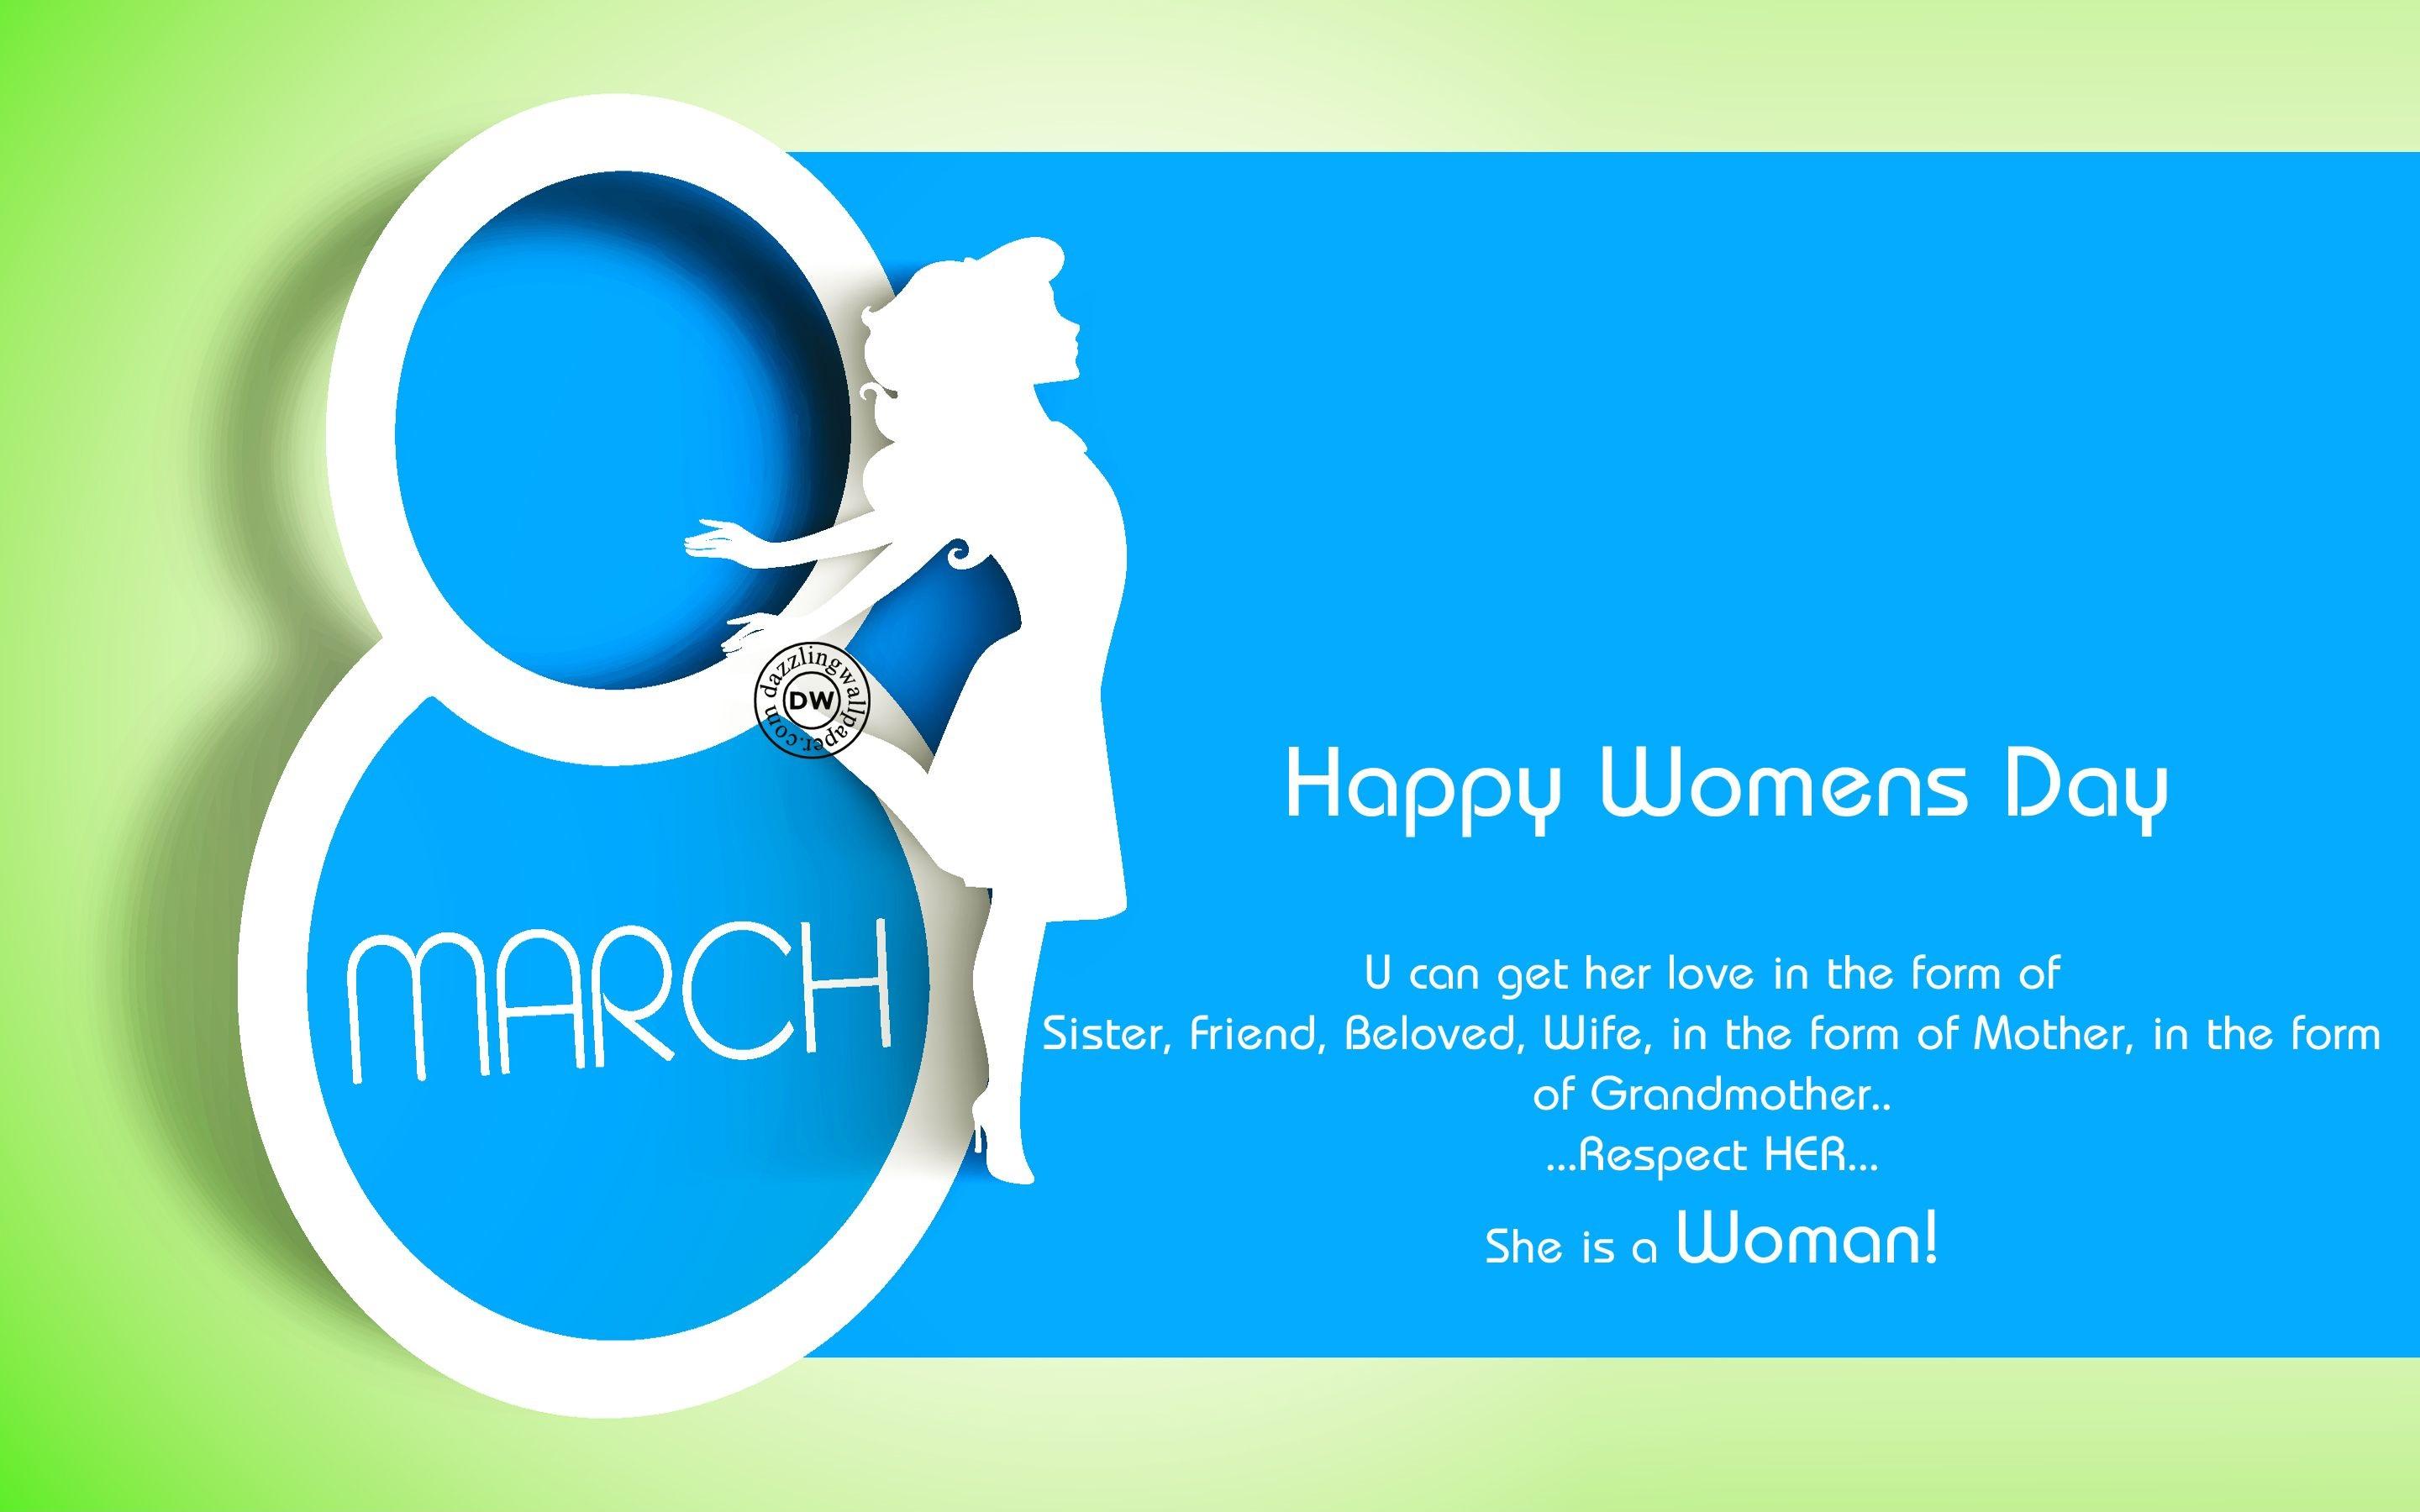 Women's Day Quotes FB Whatsapp Status SMS. Happy Women's Day Image Wishes Greetings HD Wallpaper